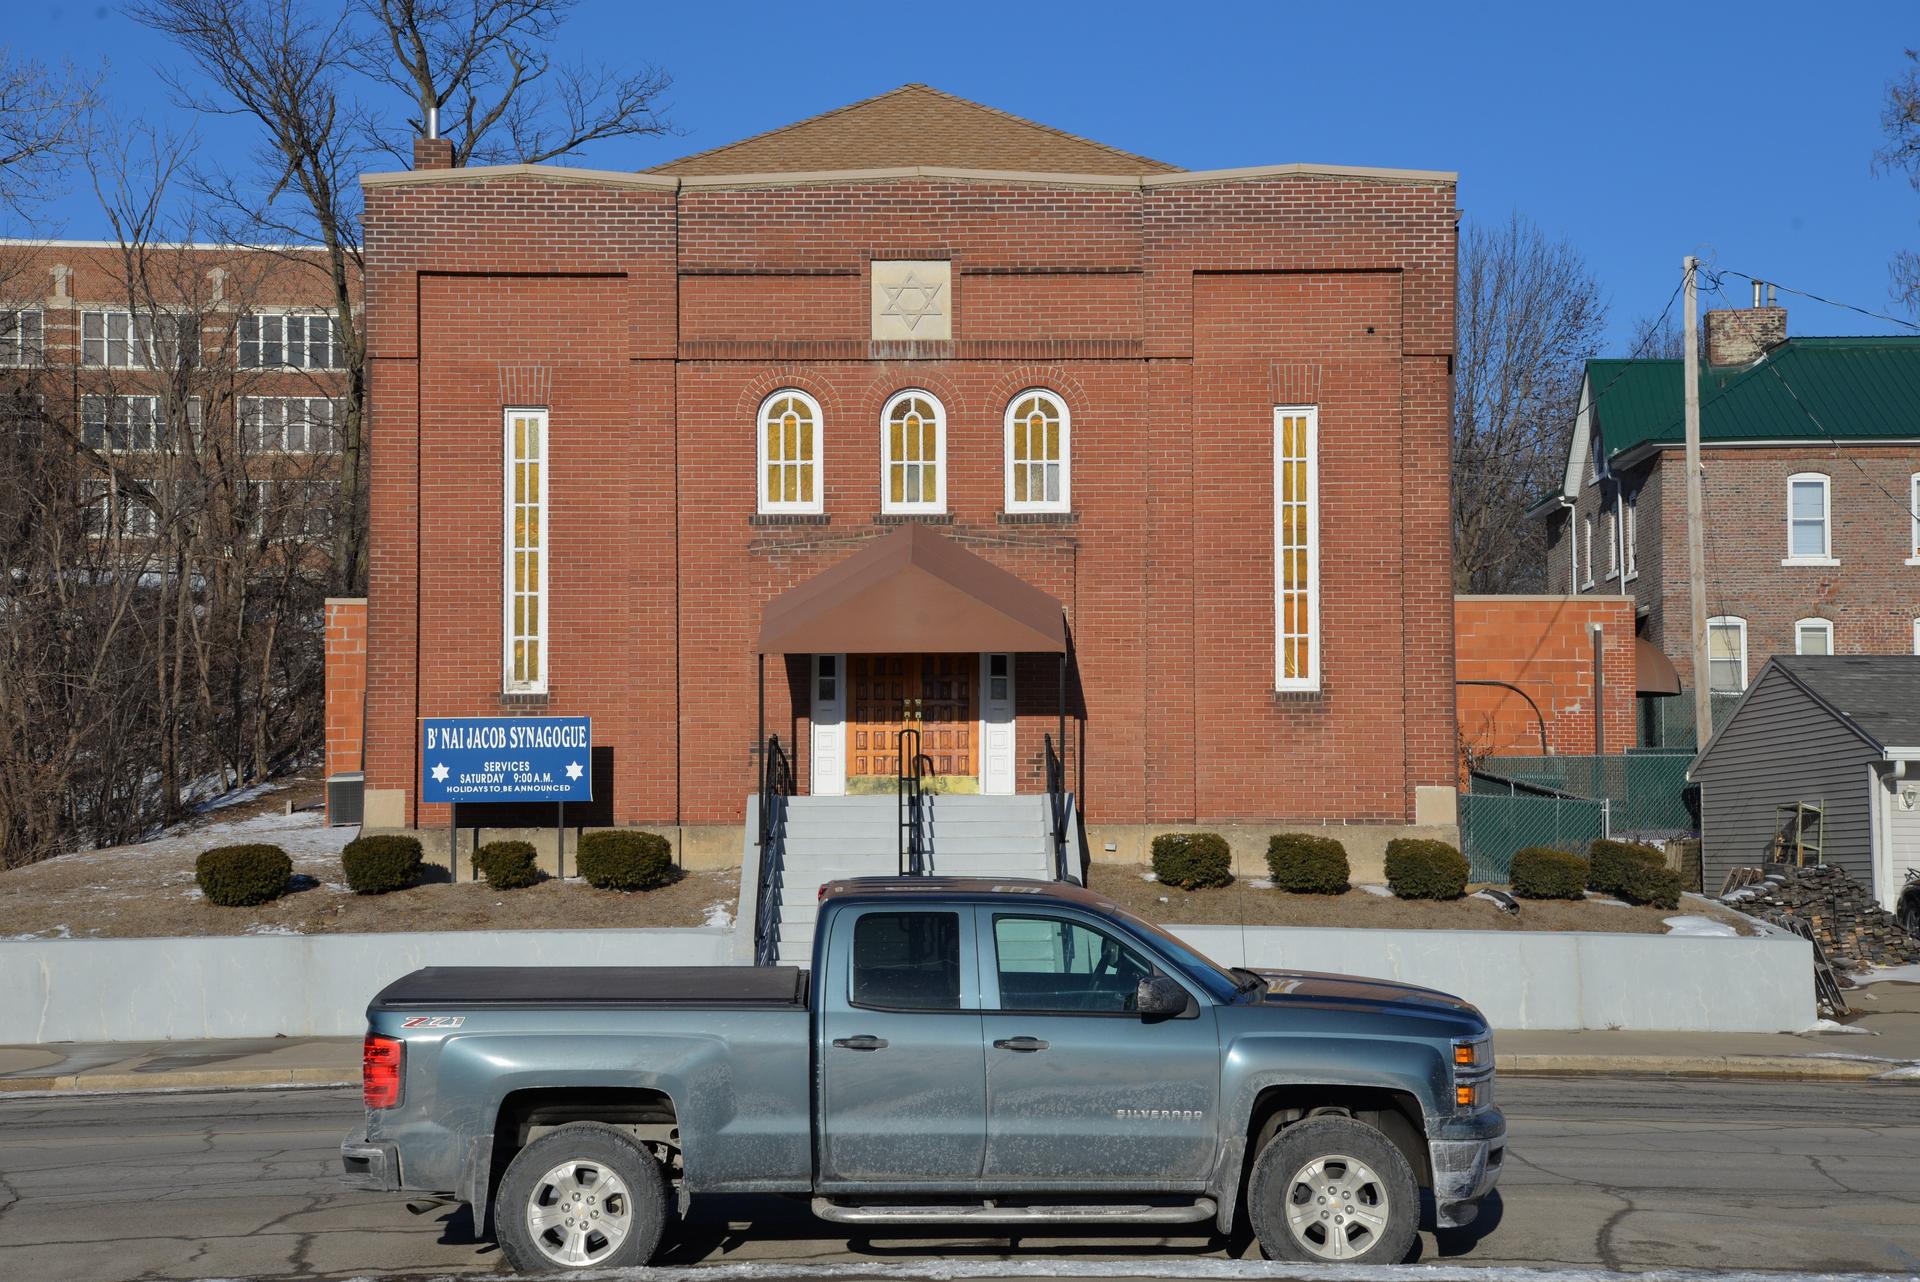 Small brick building with synagogue sign in front, on small street. Truck in foreground.